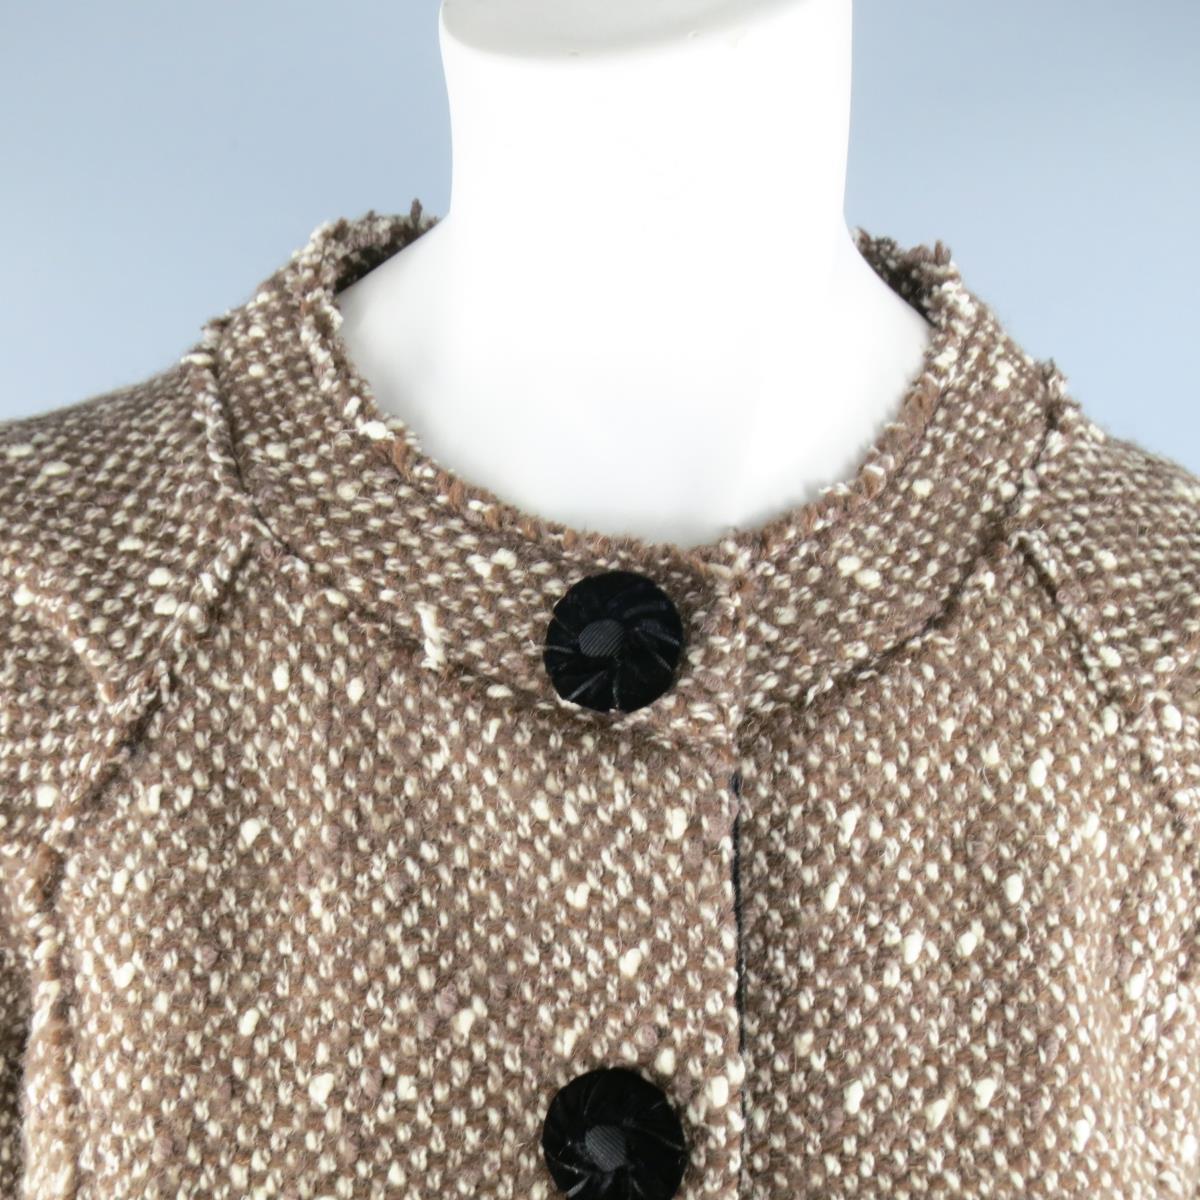 MARC JACOBS 
jacket in a light taupe brown cream wool tweed featuring a high crew neck, three quarter sleeves, hidden placket snap closure, black velvet decorative buttons, velvet trimmed pockets, and raw edge details throughout. Made USA.
Excellent